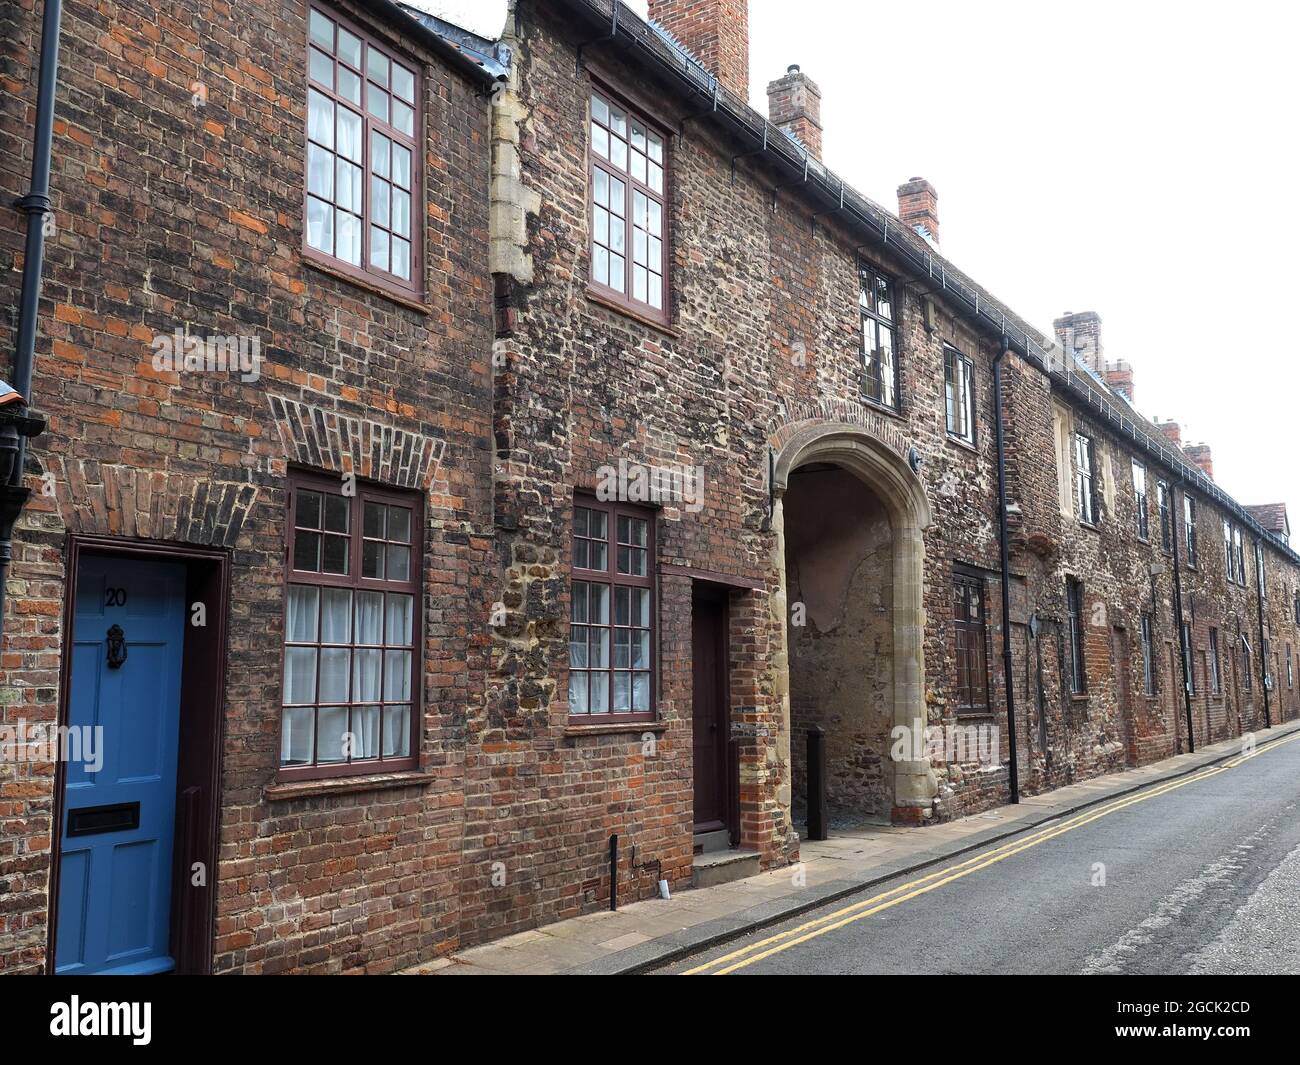 View looking along Priory Lane in the old historic area of King's Lynn in Norfolk UK Stock Photo